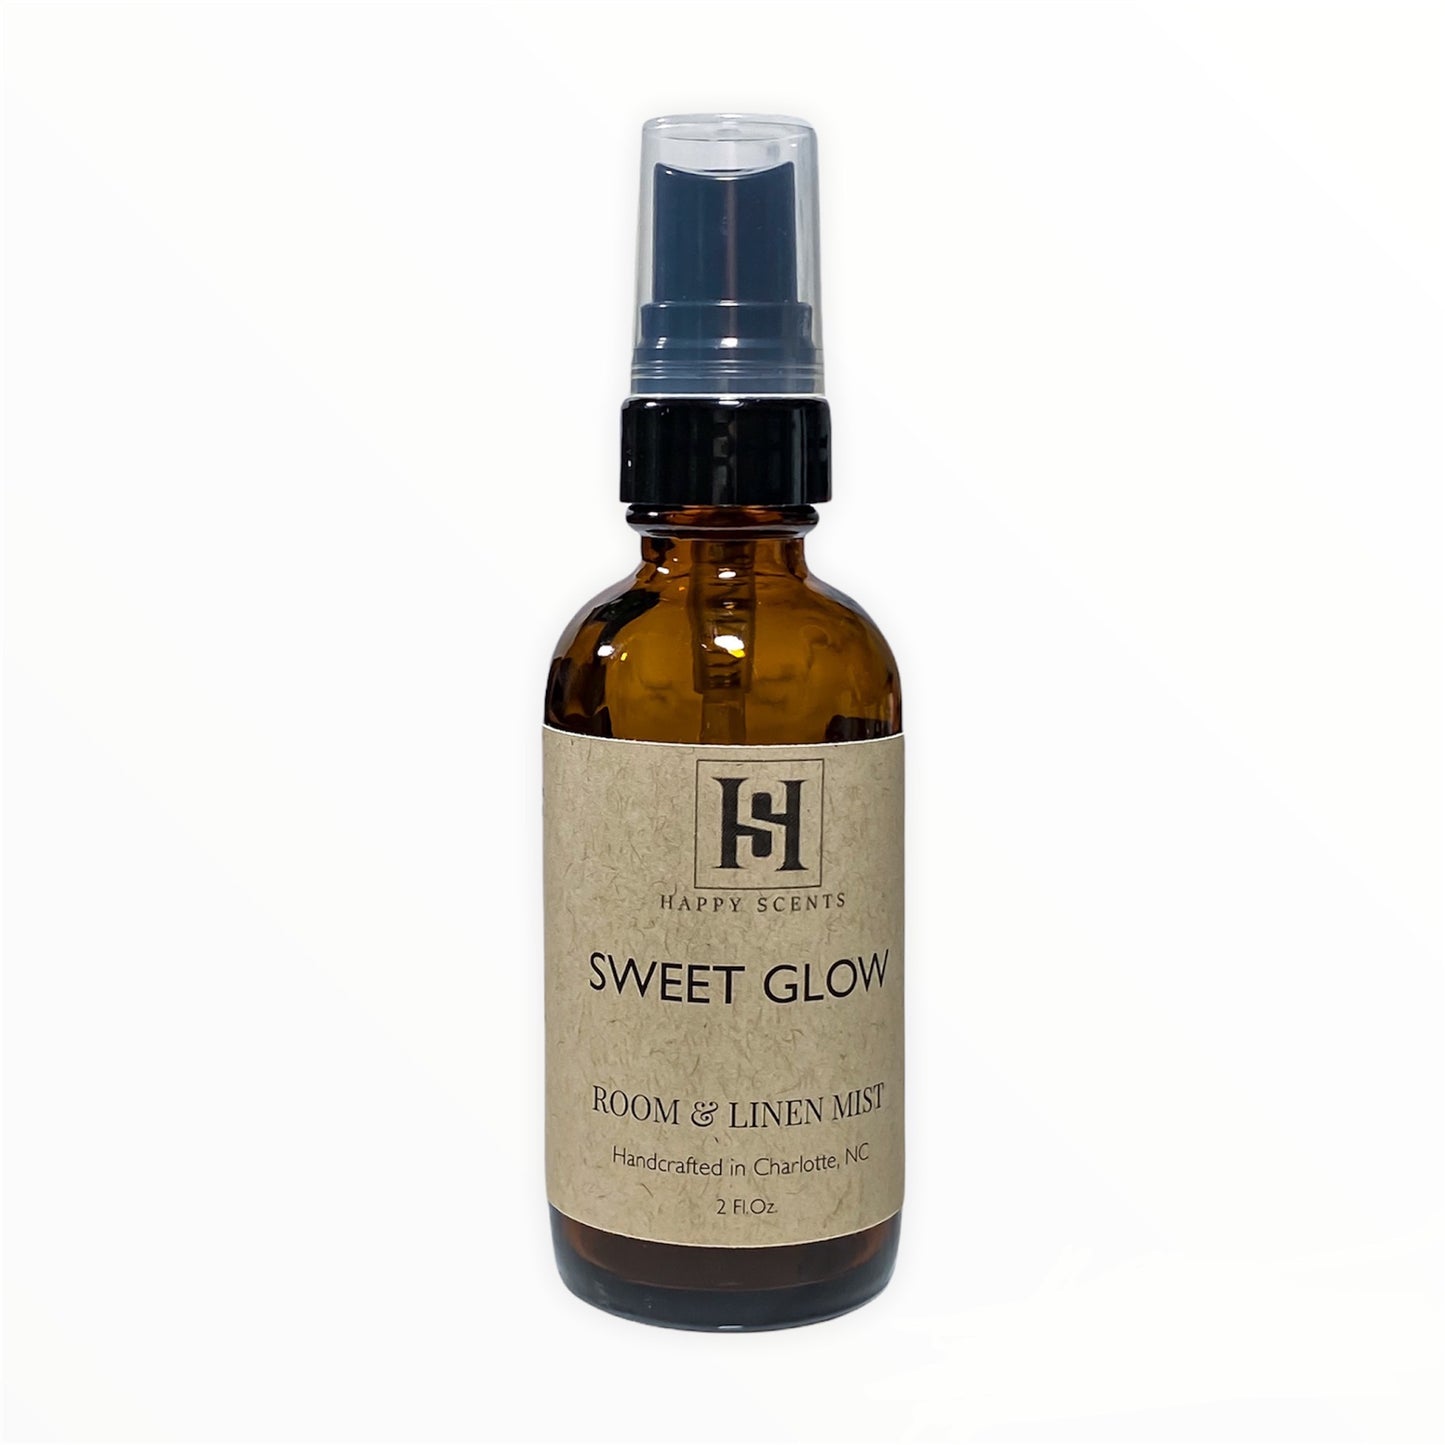 Sweet Glow room and linen spray. Similar to the Lush fragrance snow fairy.